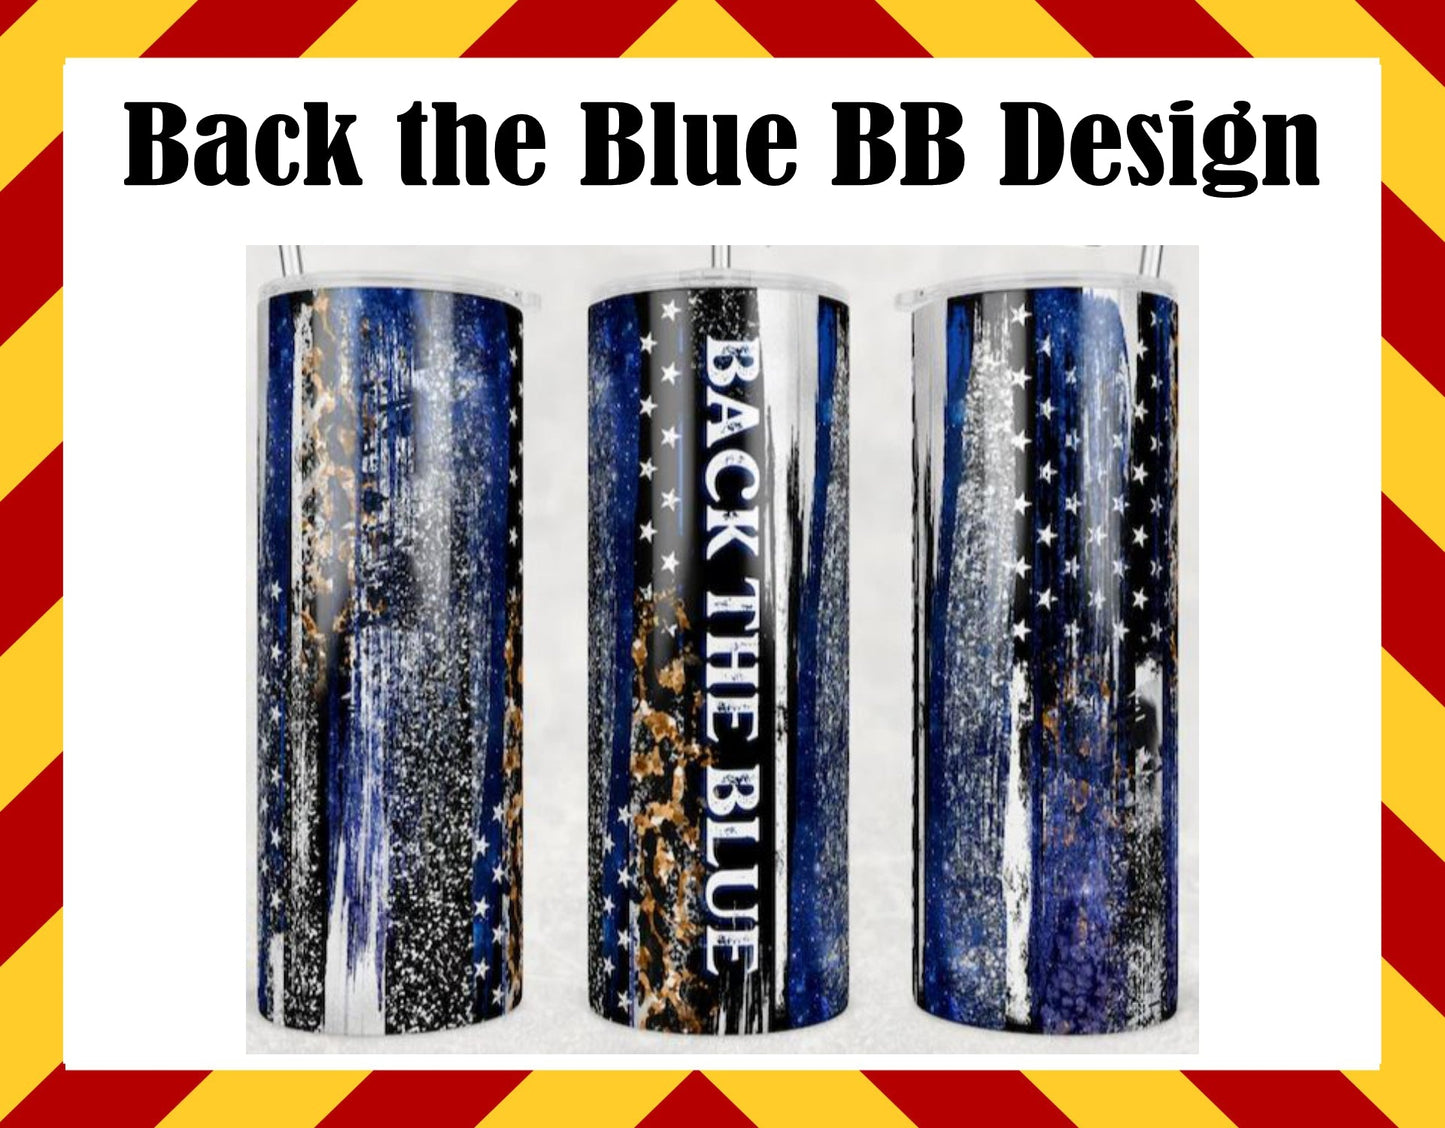 Stainless Steel Cup - Back the Blue BB Design